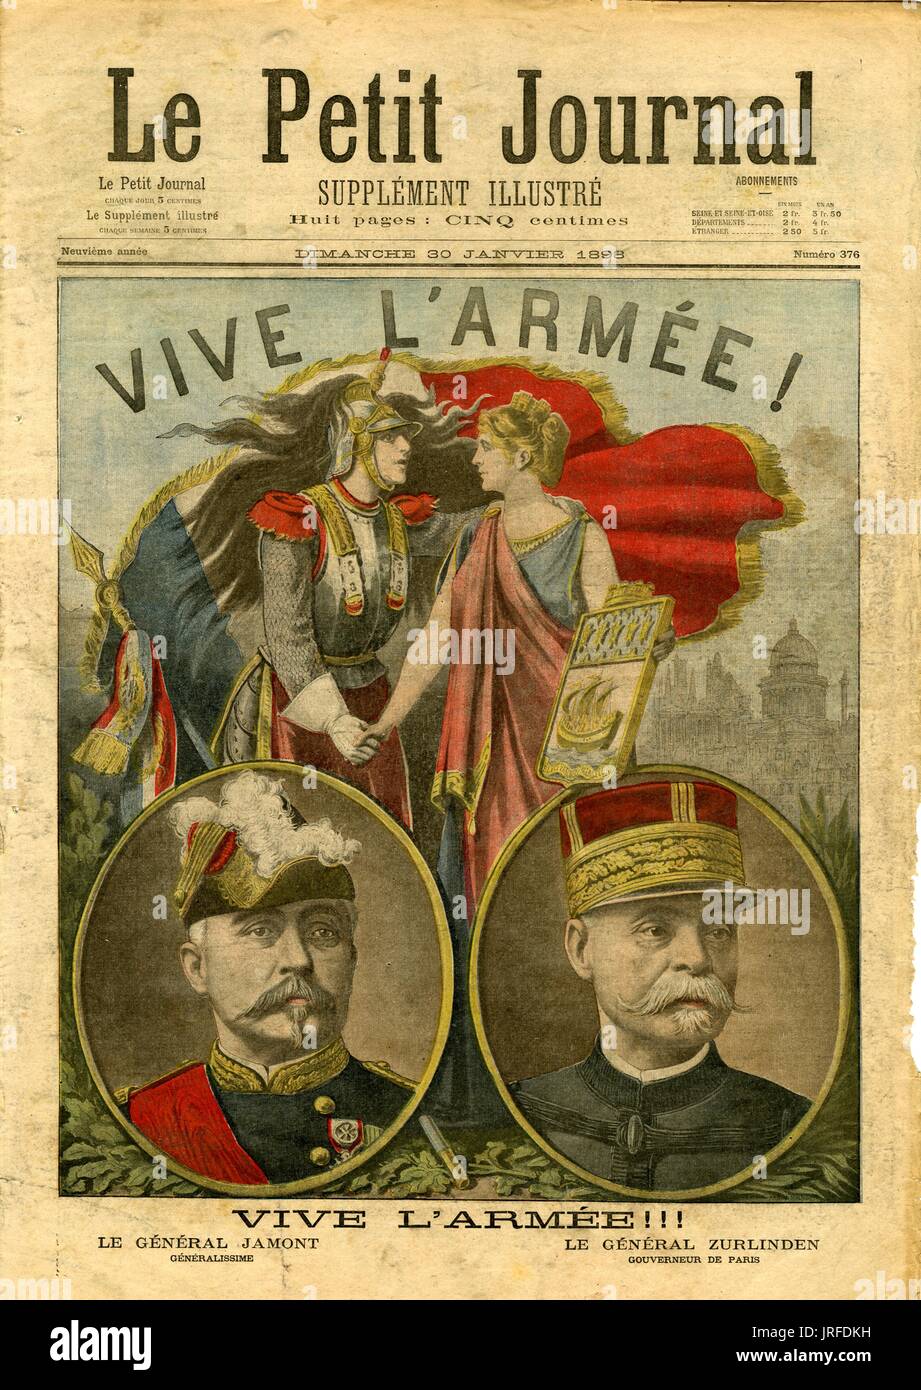 Le Petit Journal cover titled 'Vive L'Armee', number 376, a man of the military and a womanand holding hands in front of a French flag, below are headshots of General Edouard Ferdinand Jamont and governor General Emile Auguste Zurlinden of Paris, 1898. Stock Photo